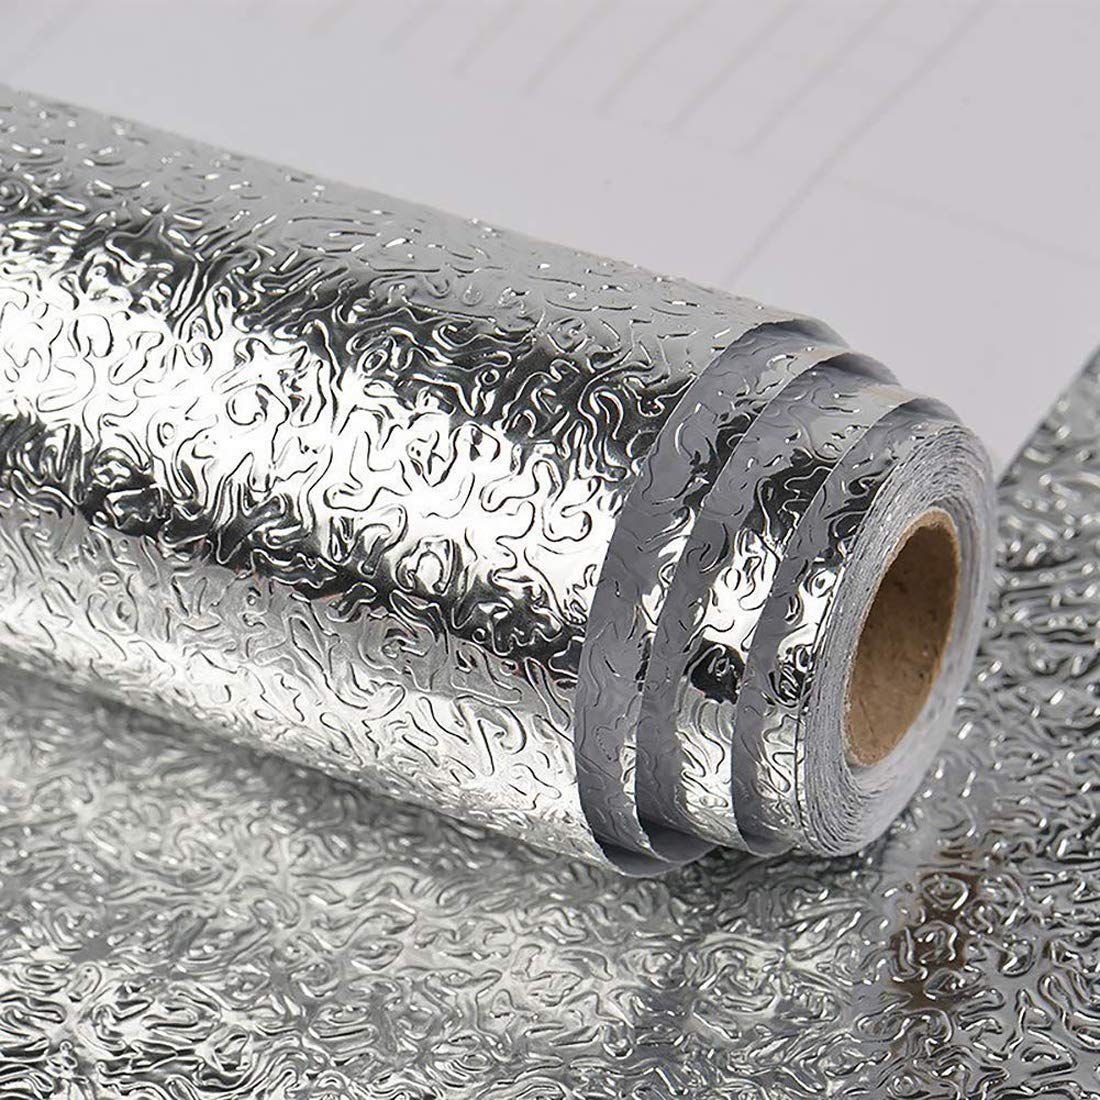 Aluminium-Foil-Waterproof,-High-Temperature-Resistant-Kitchen-Wall-Stickers-(Silver,-2-m)